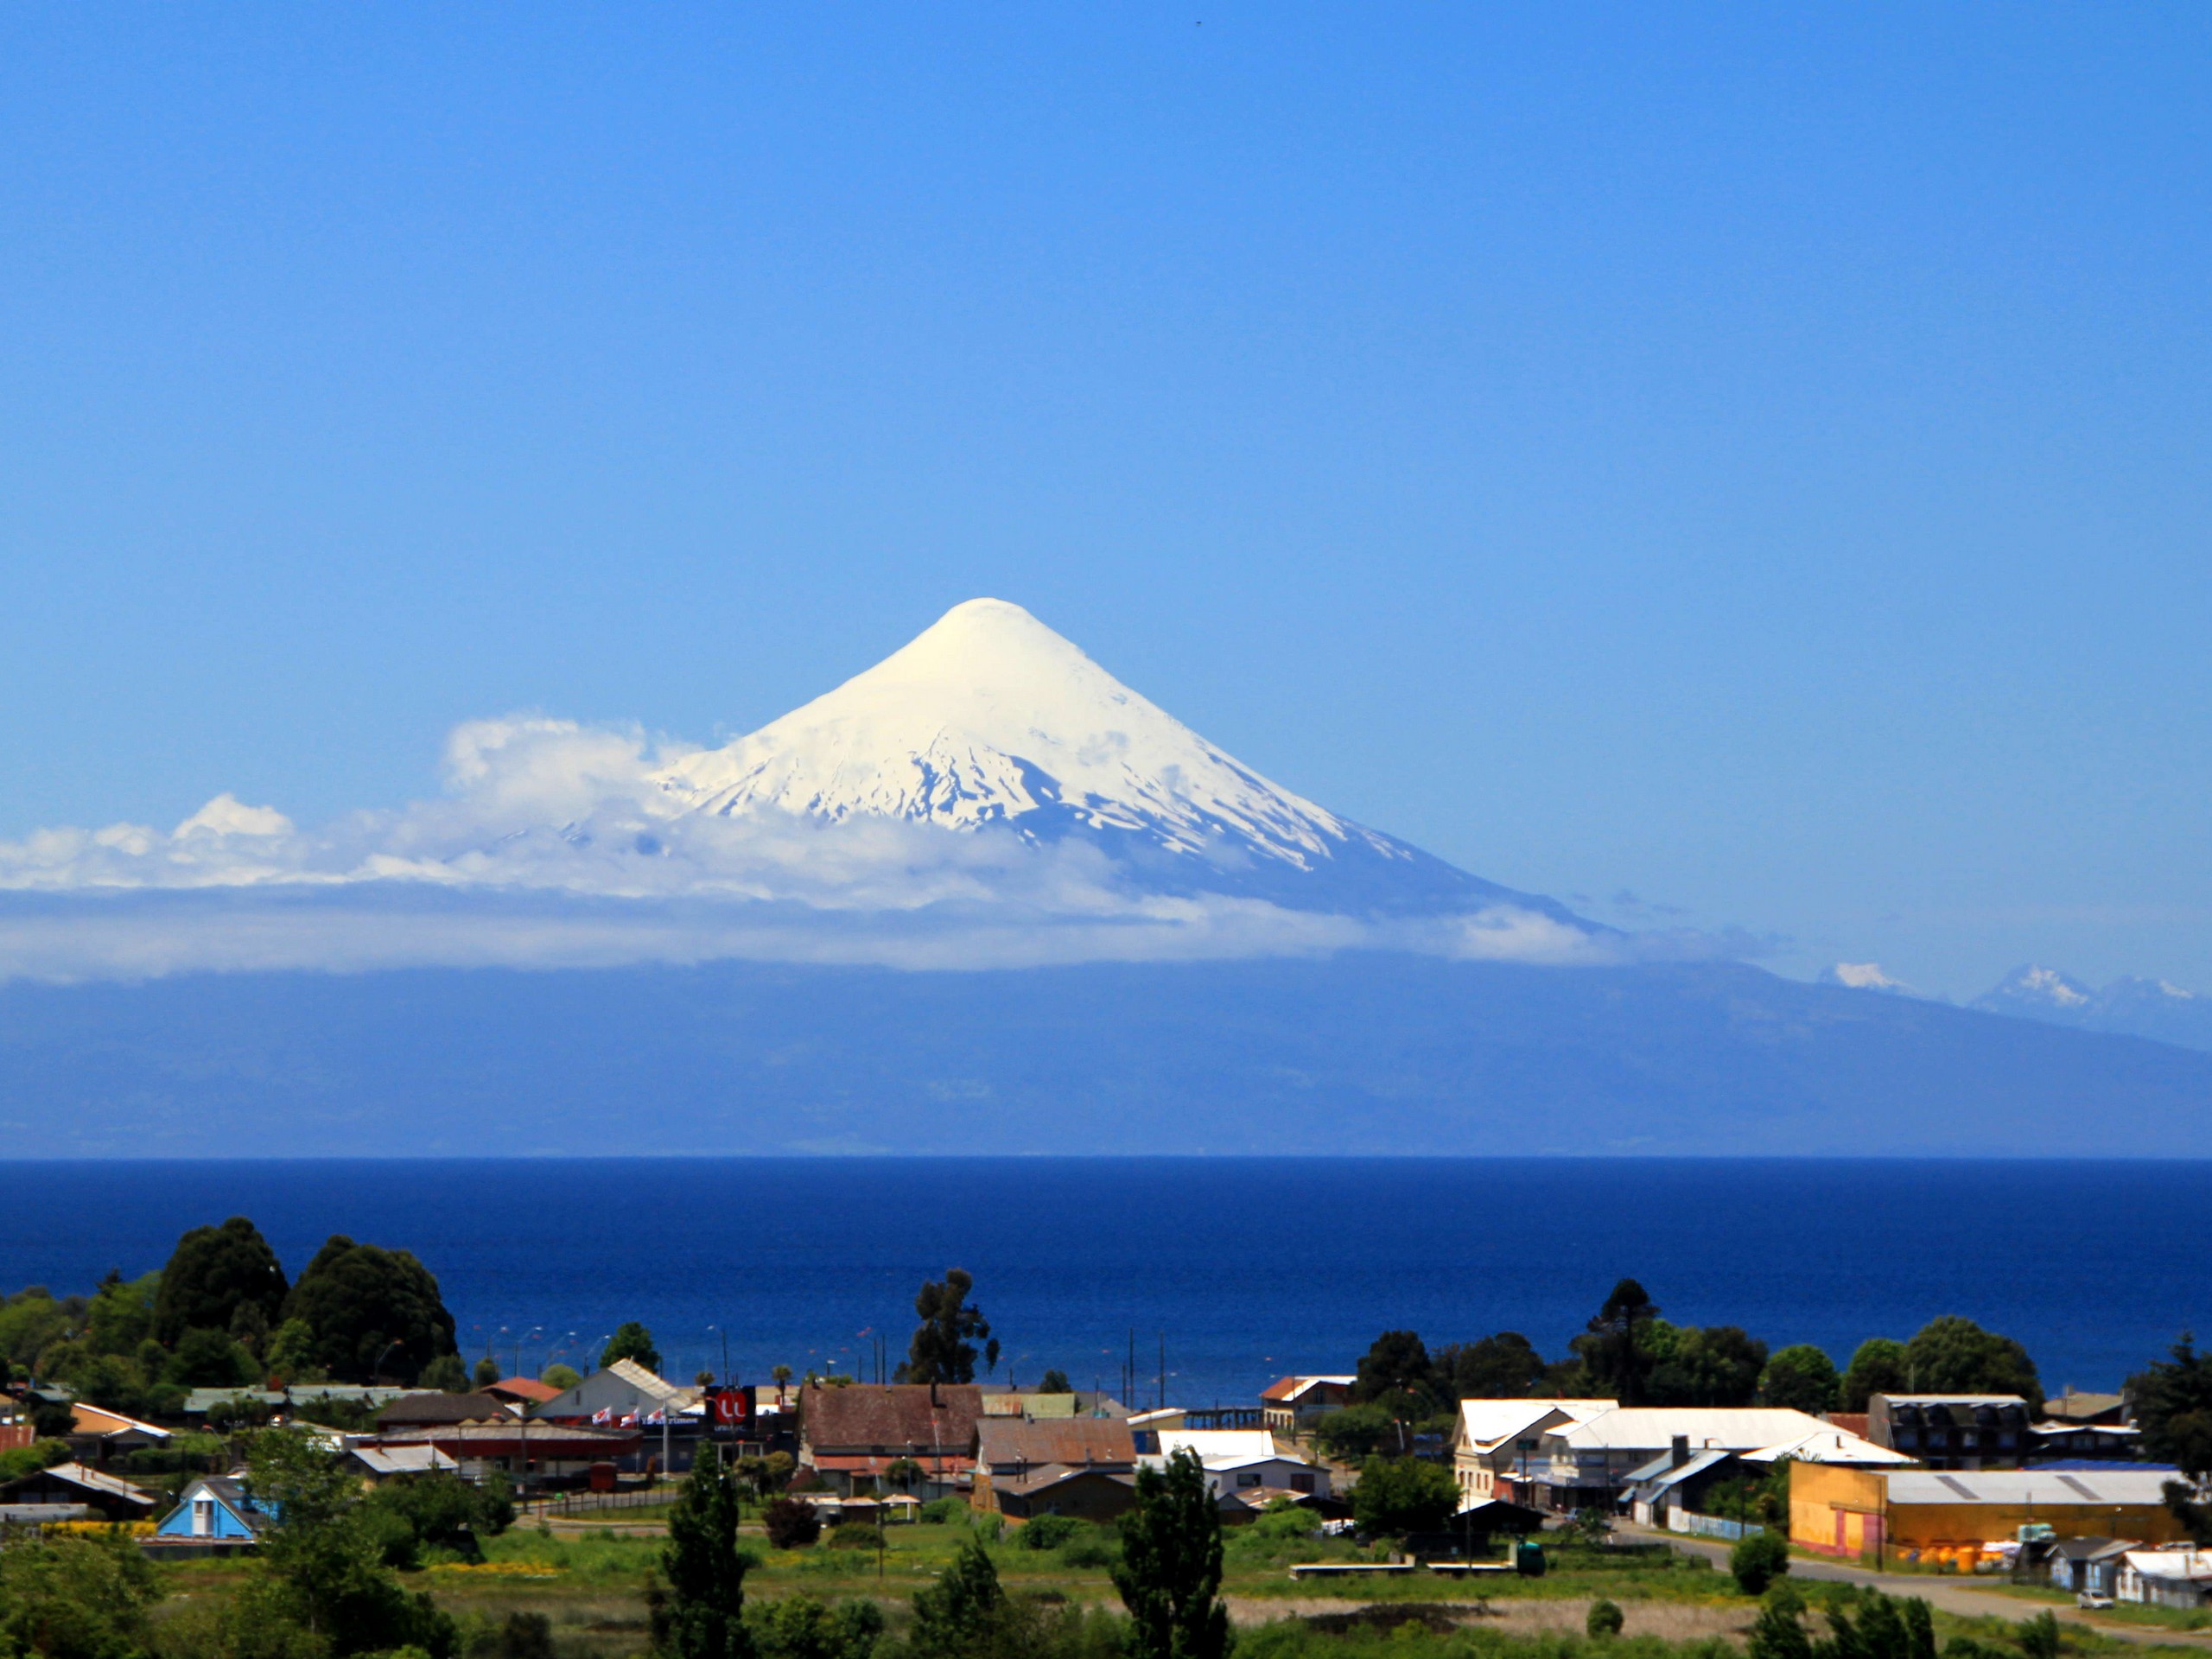 Osorno volcano as seen from afar